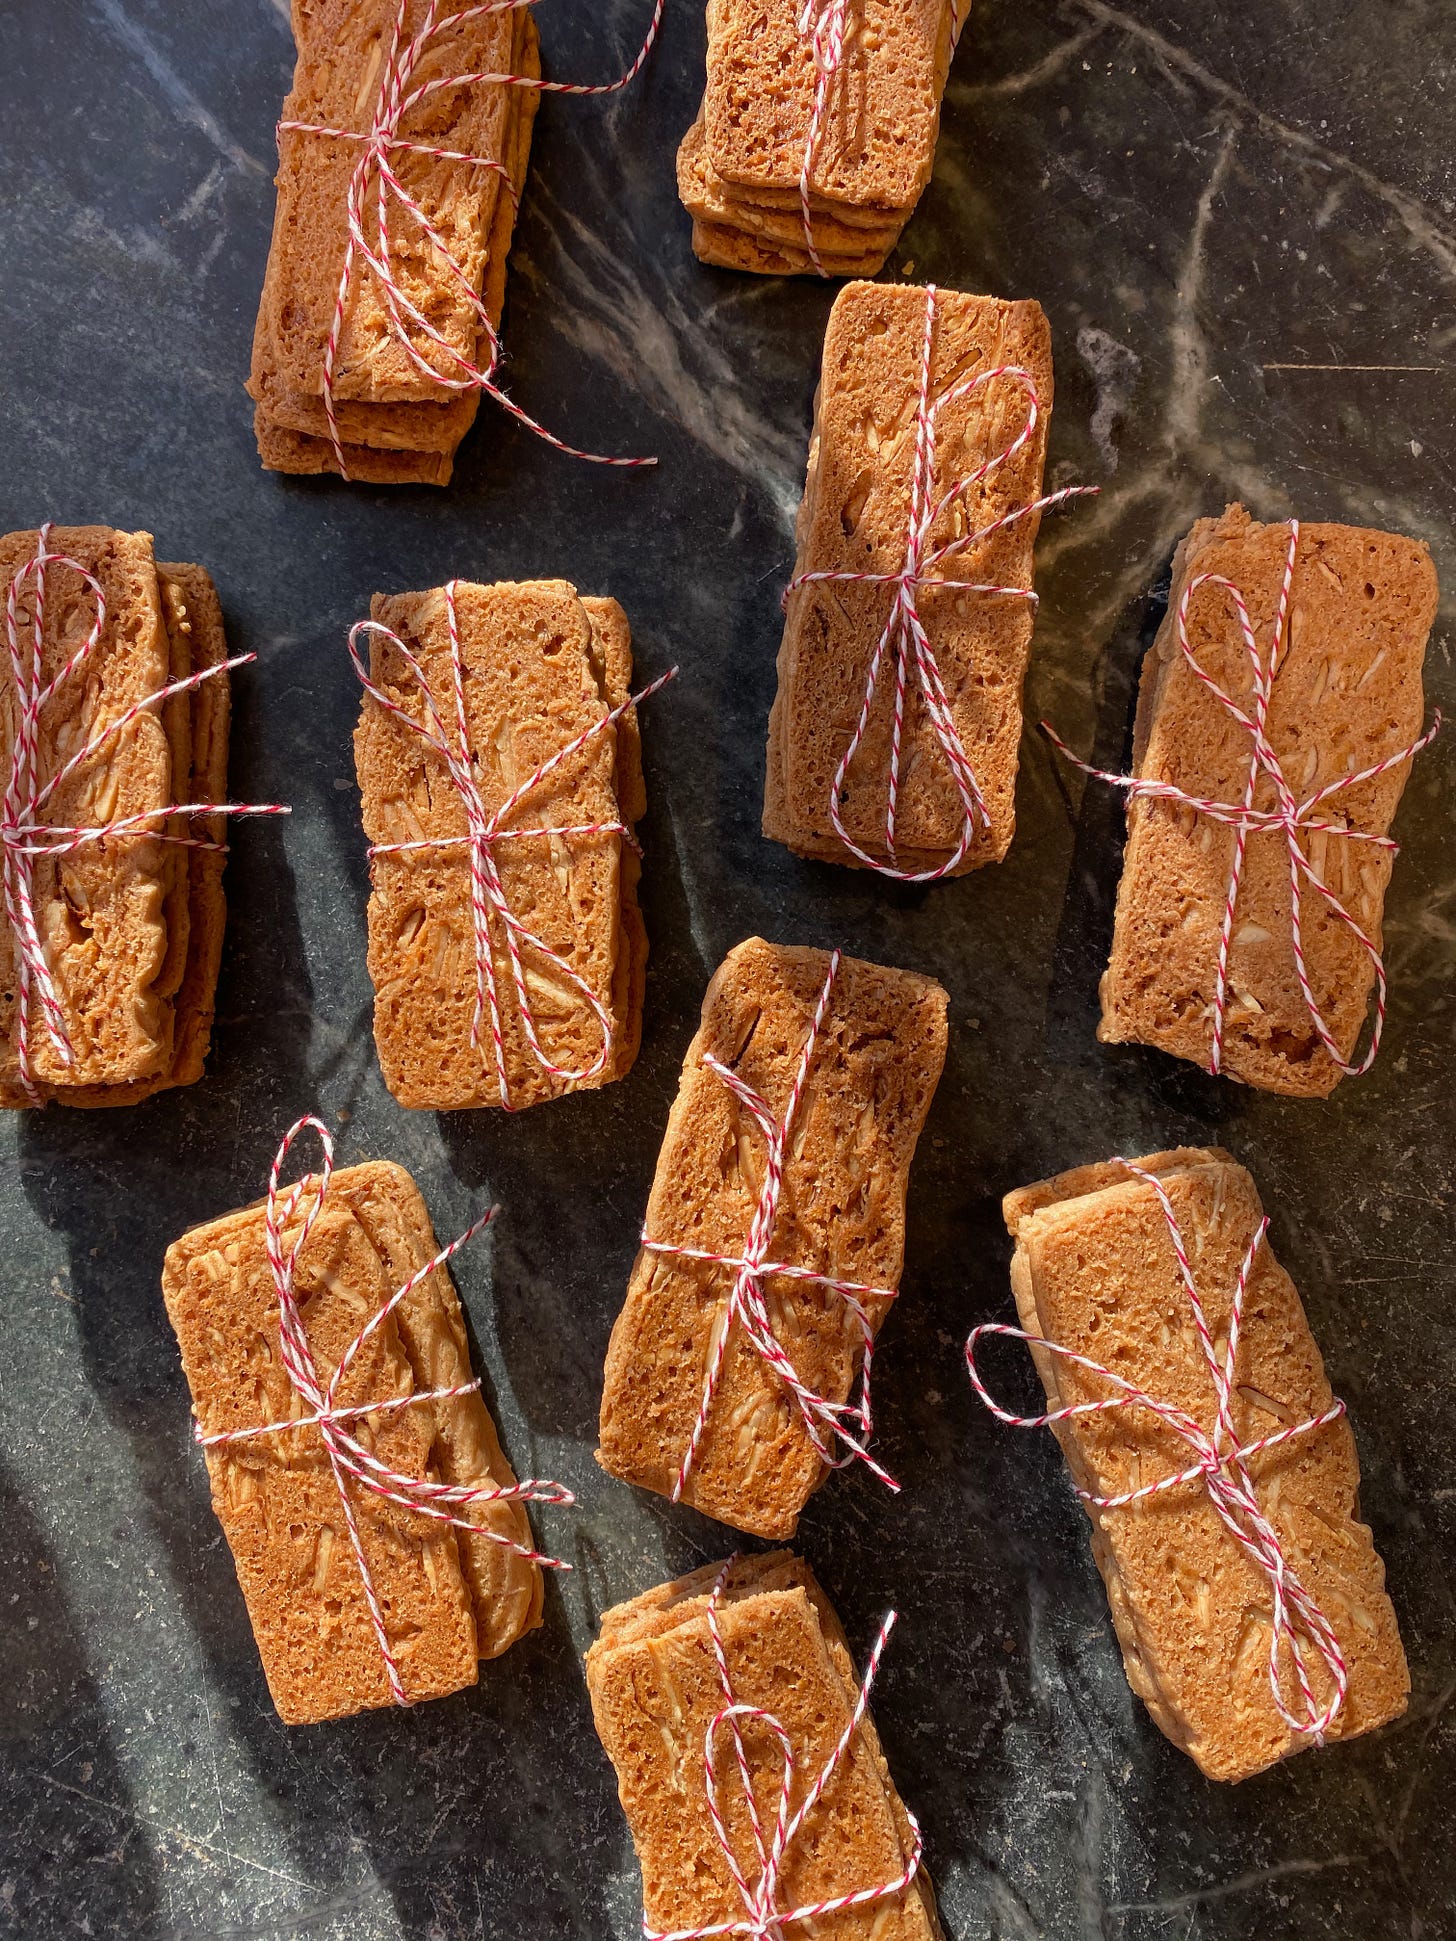 Several small bundles of thin rectangular cookies tied up with red and white baker’s twine sit on a stone counter.